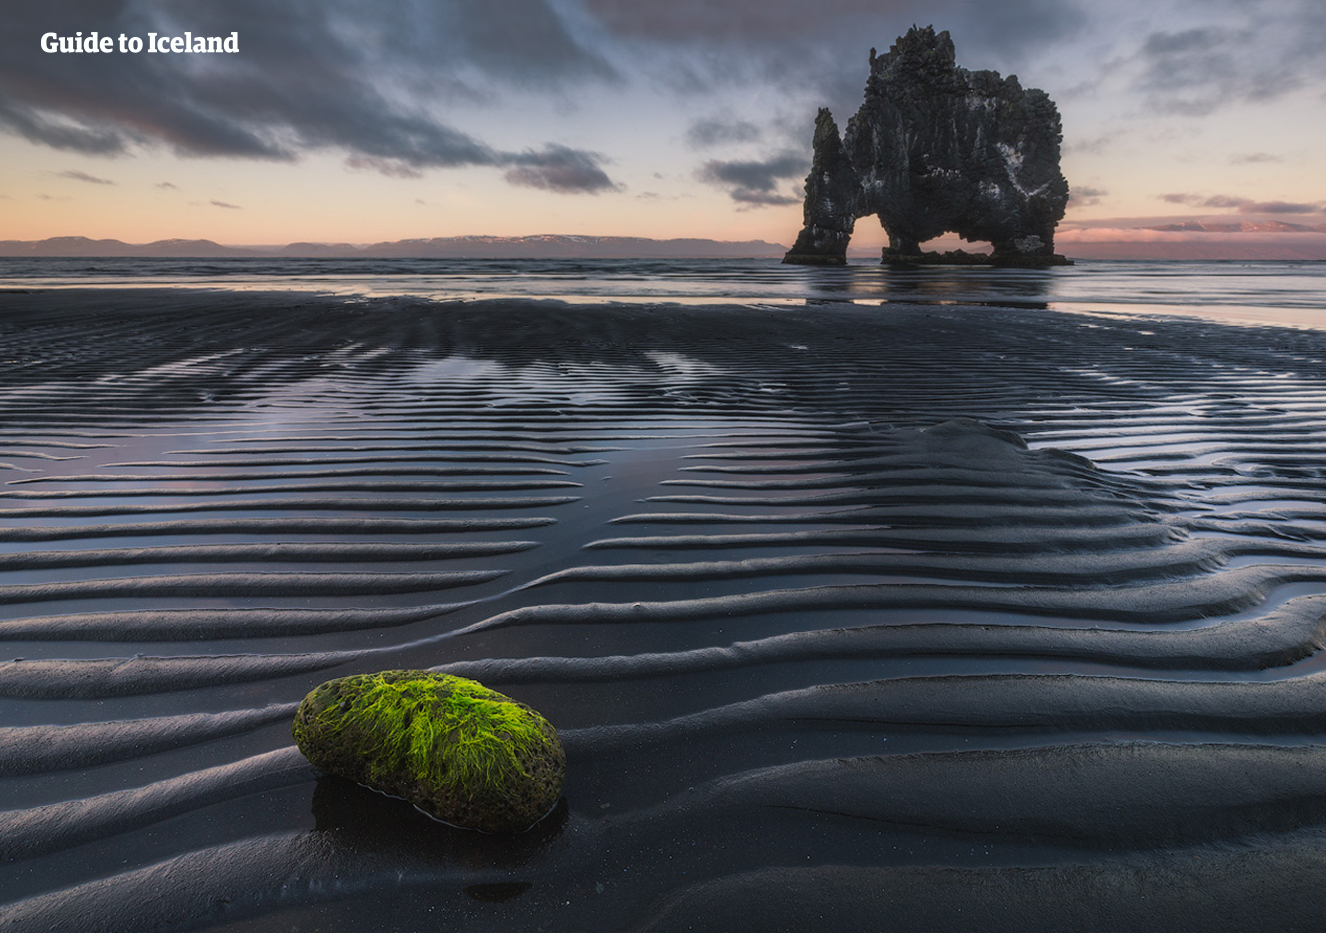 North Iceland has a range of cultural and natural attractions.